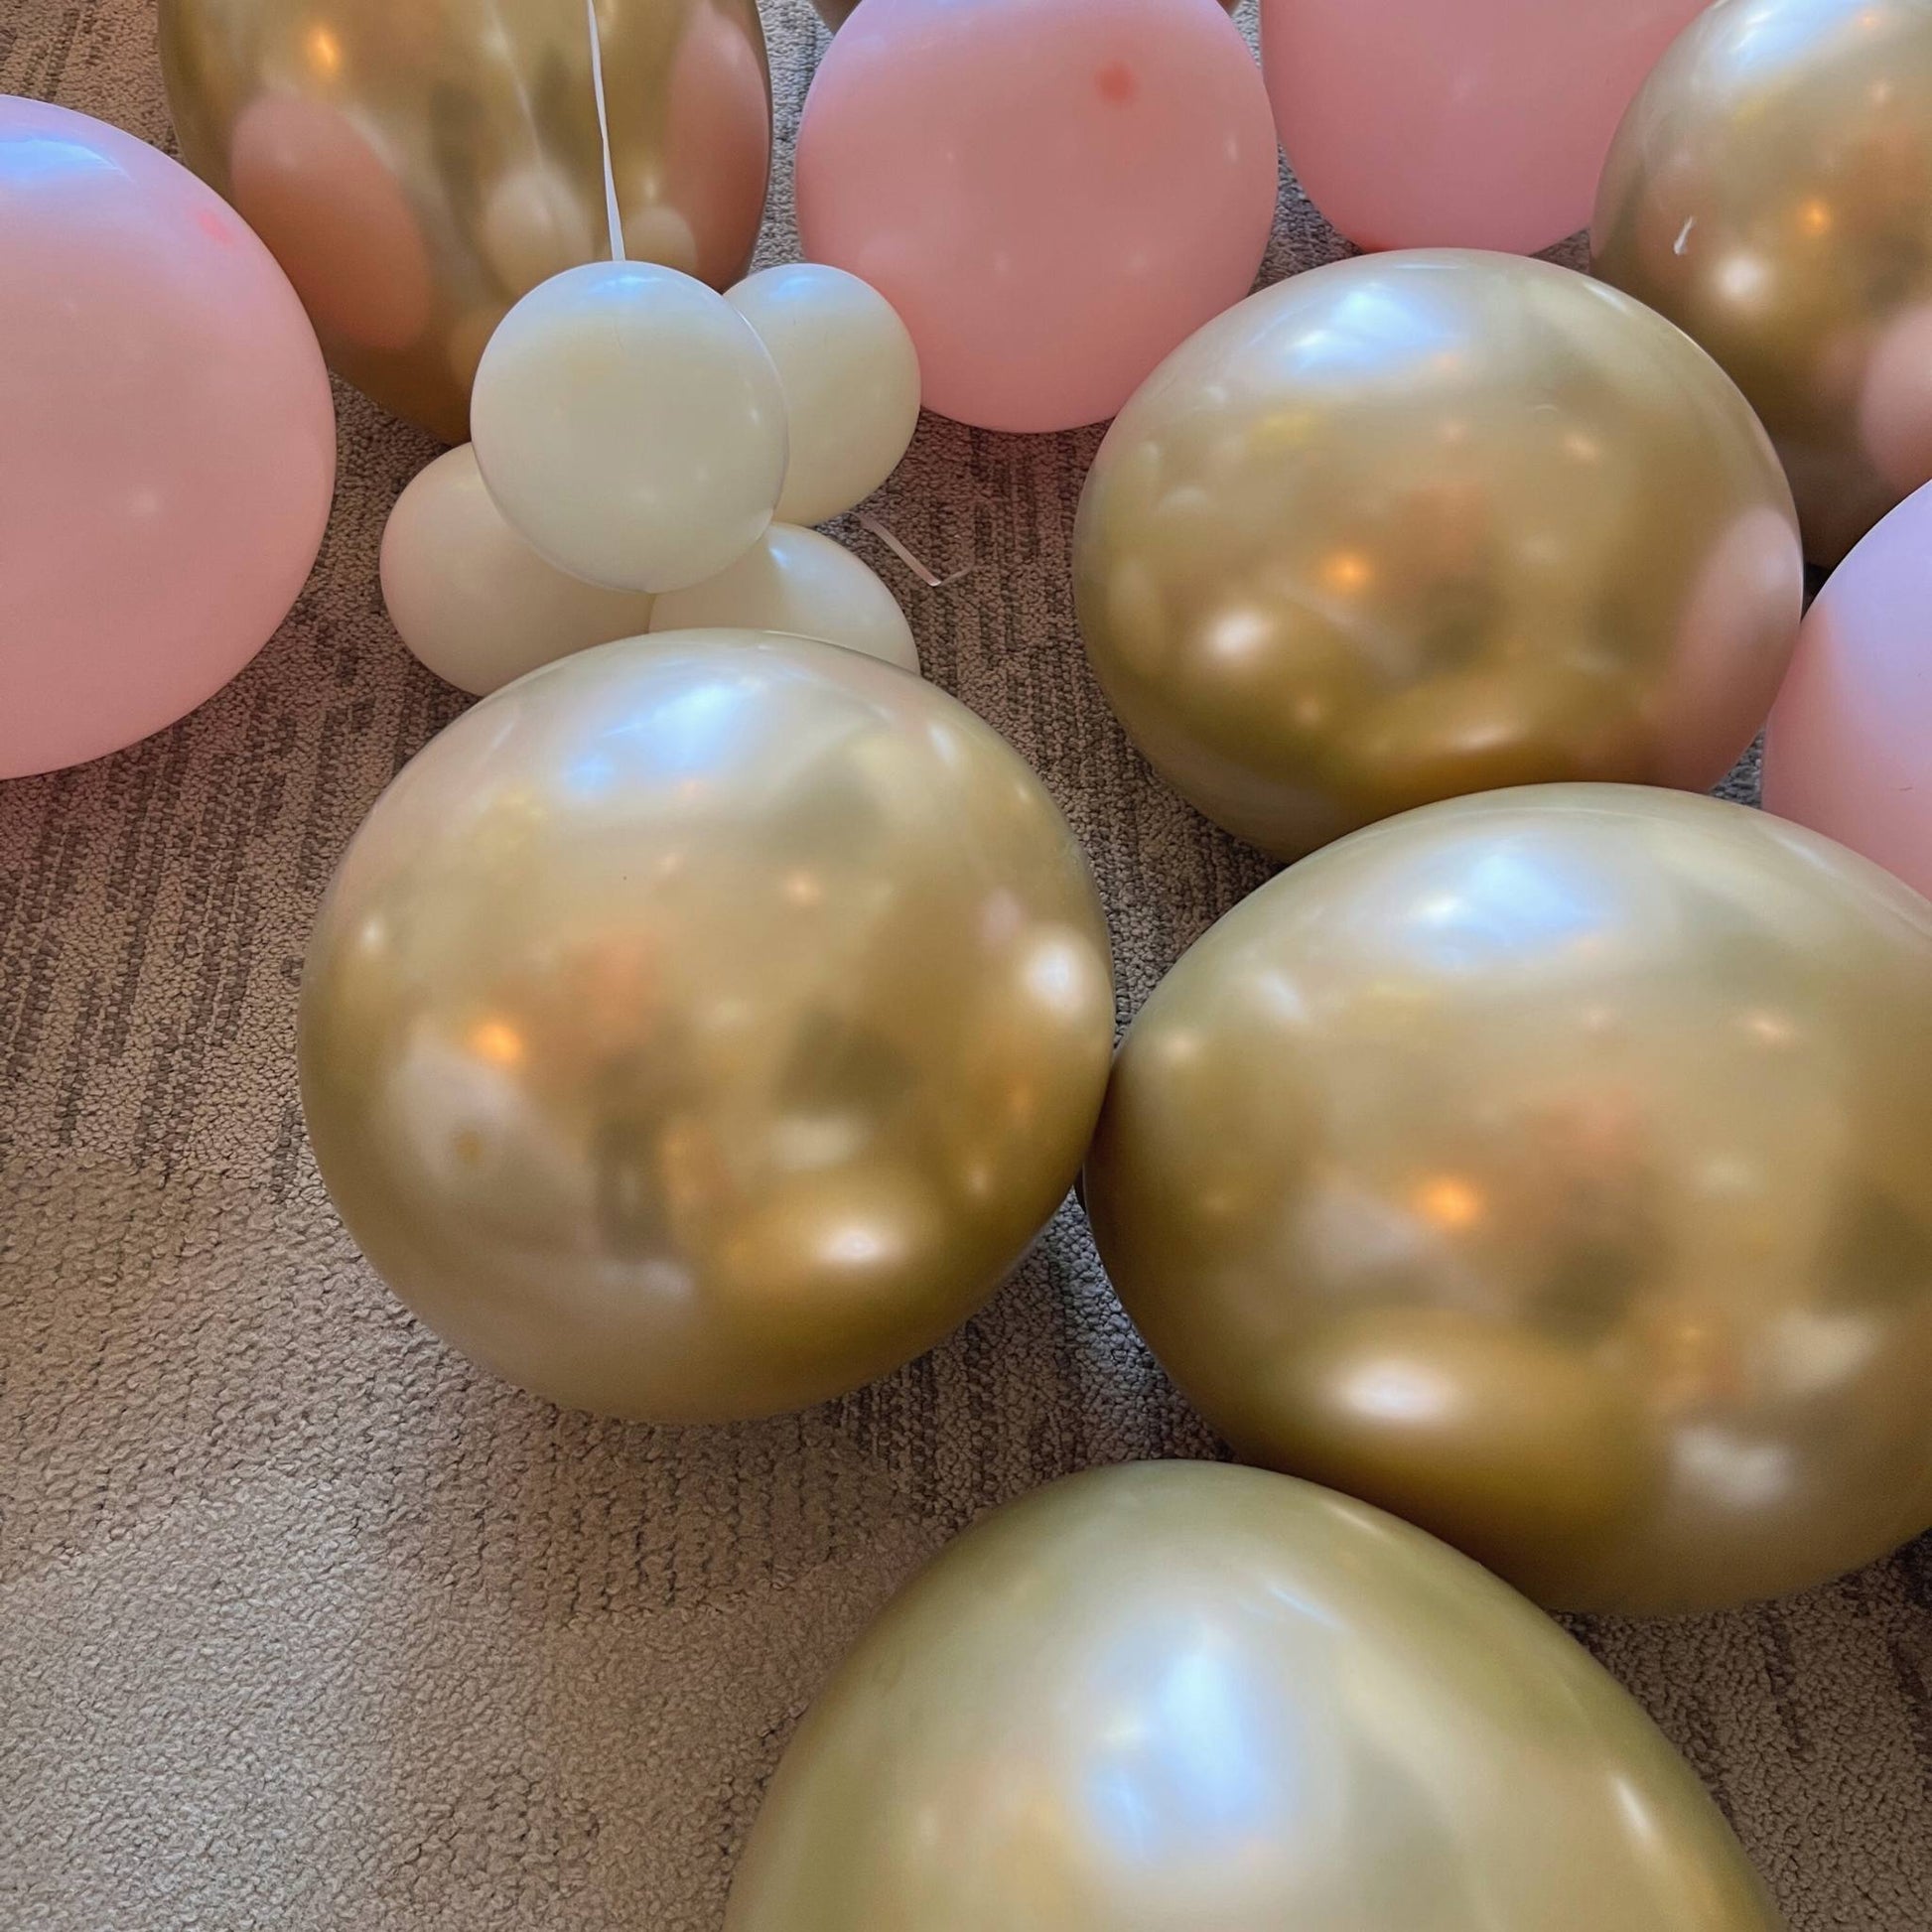 Ground Balloons pink, white and gold